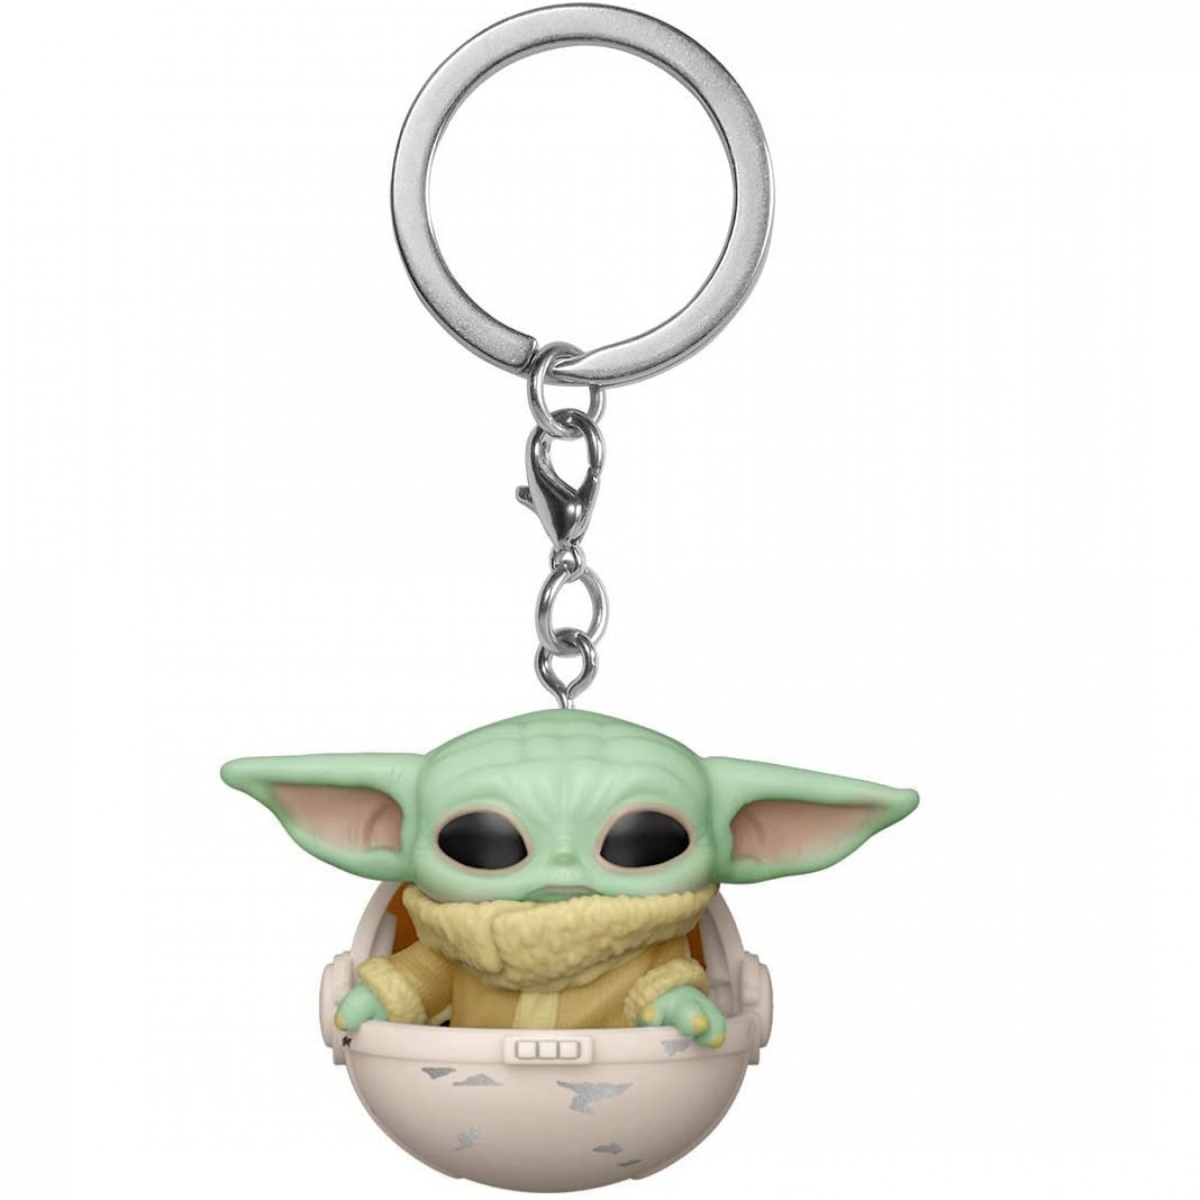 Picture of Star Wars 820017 Star Wars The Mandalorian Grogu Child in Canister Funko Pop Keychain